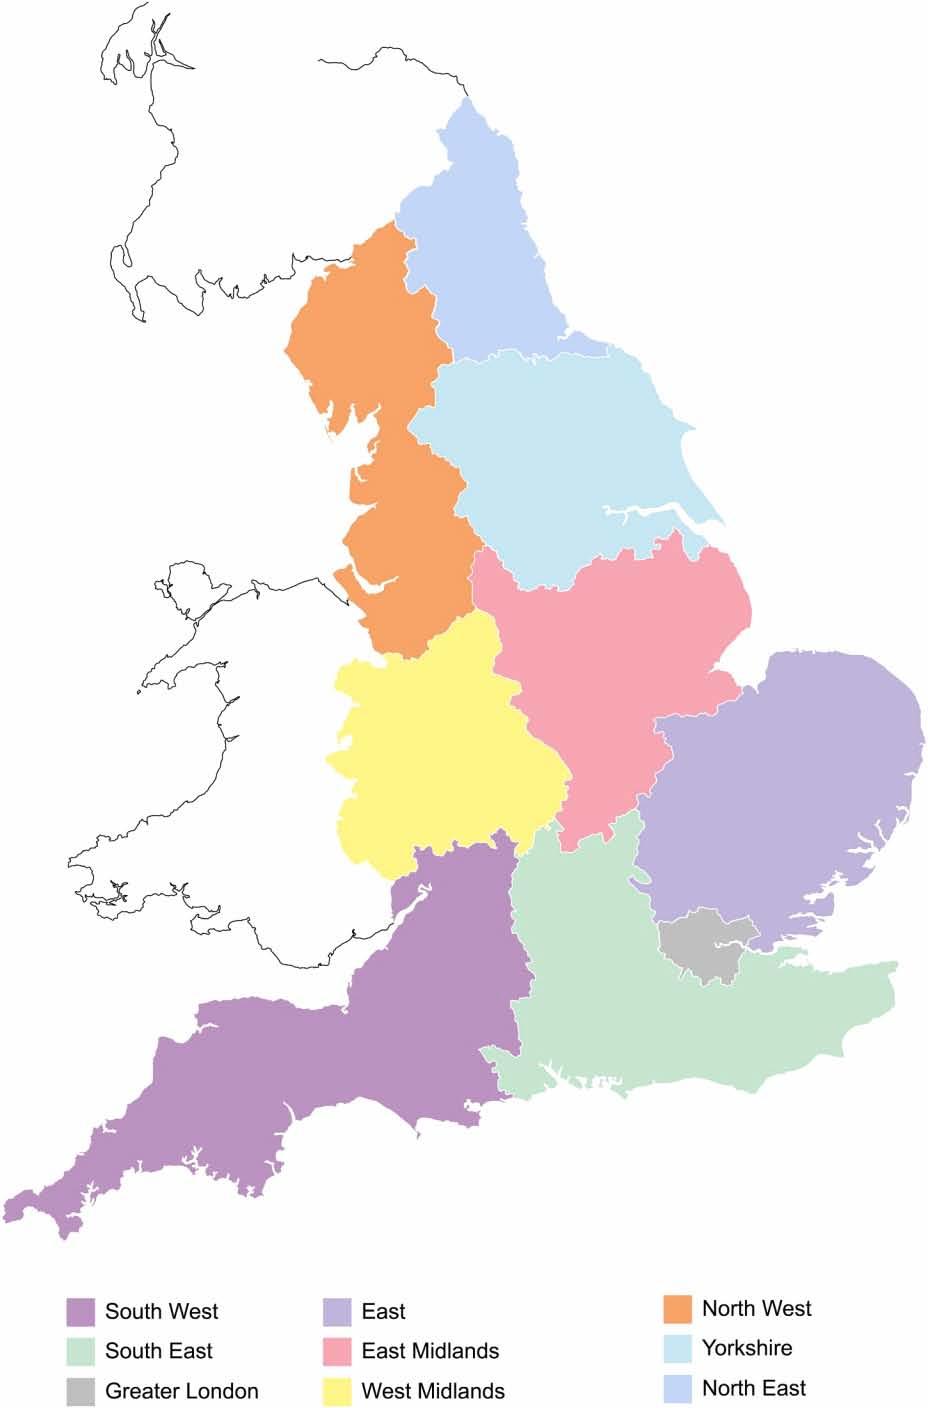 1 London and the national context The national survey data was analysed in relation to the regions of Arts